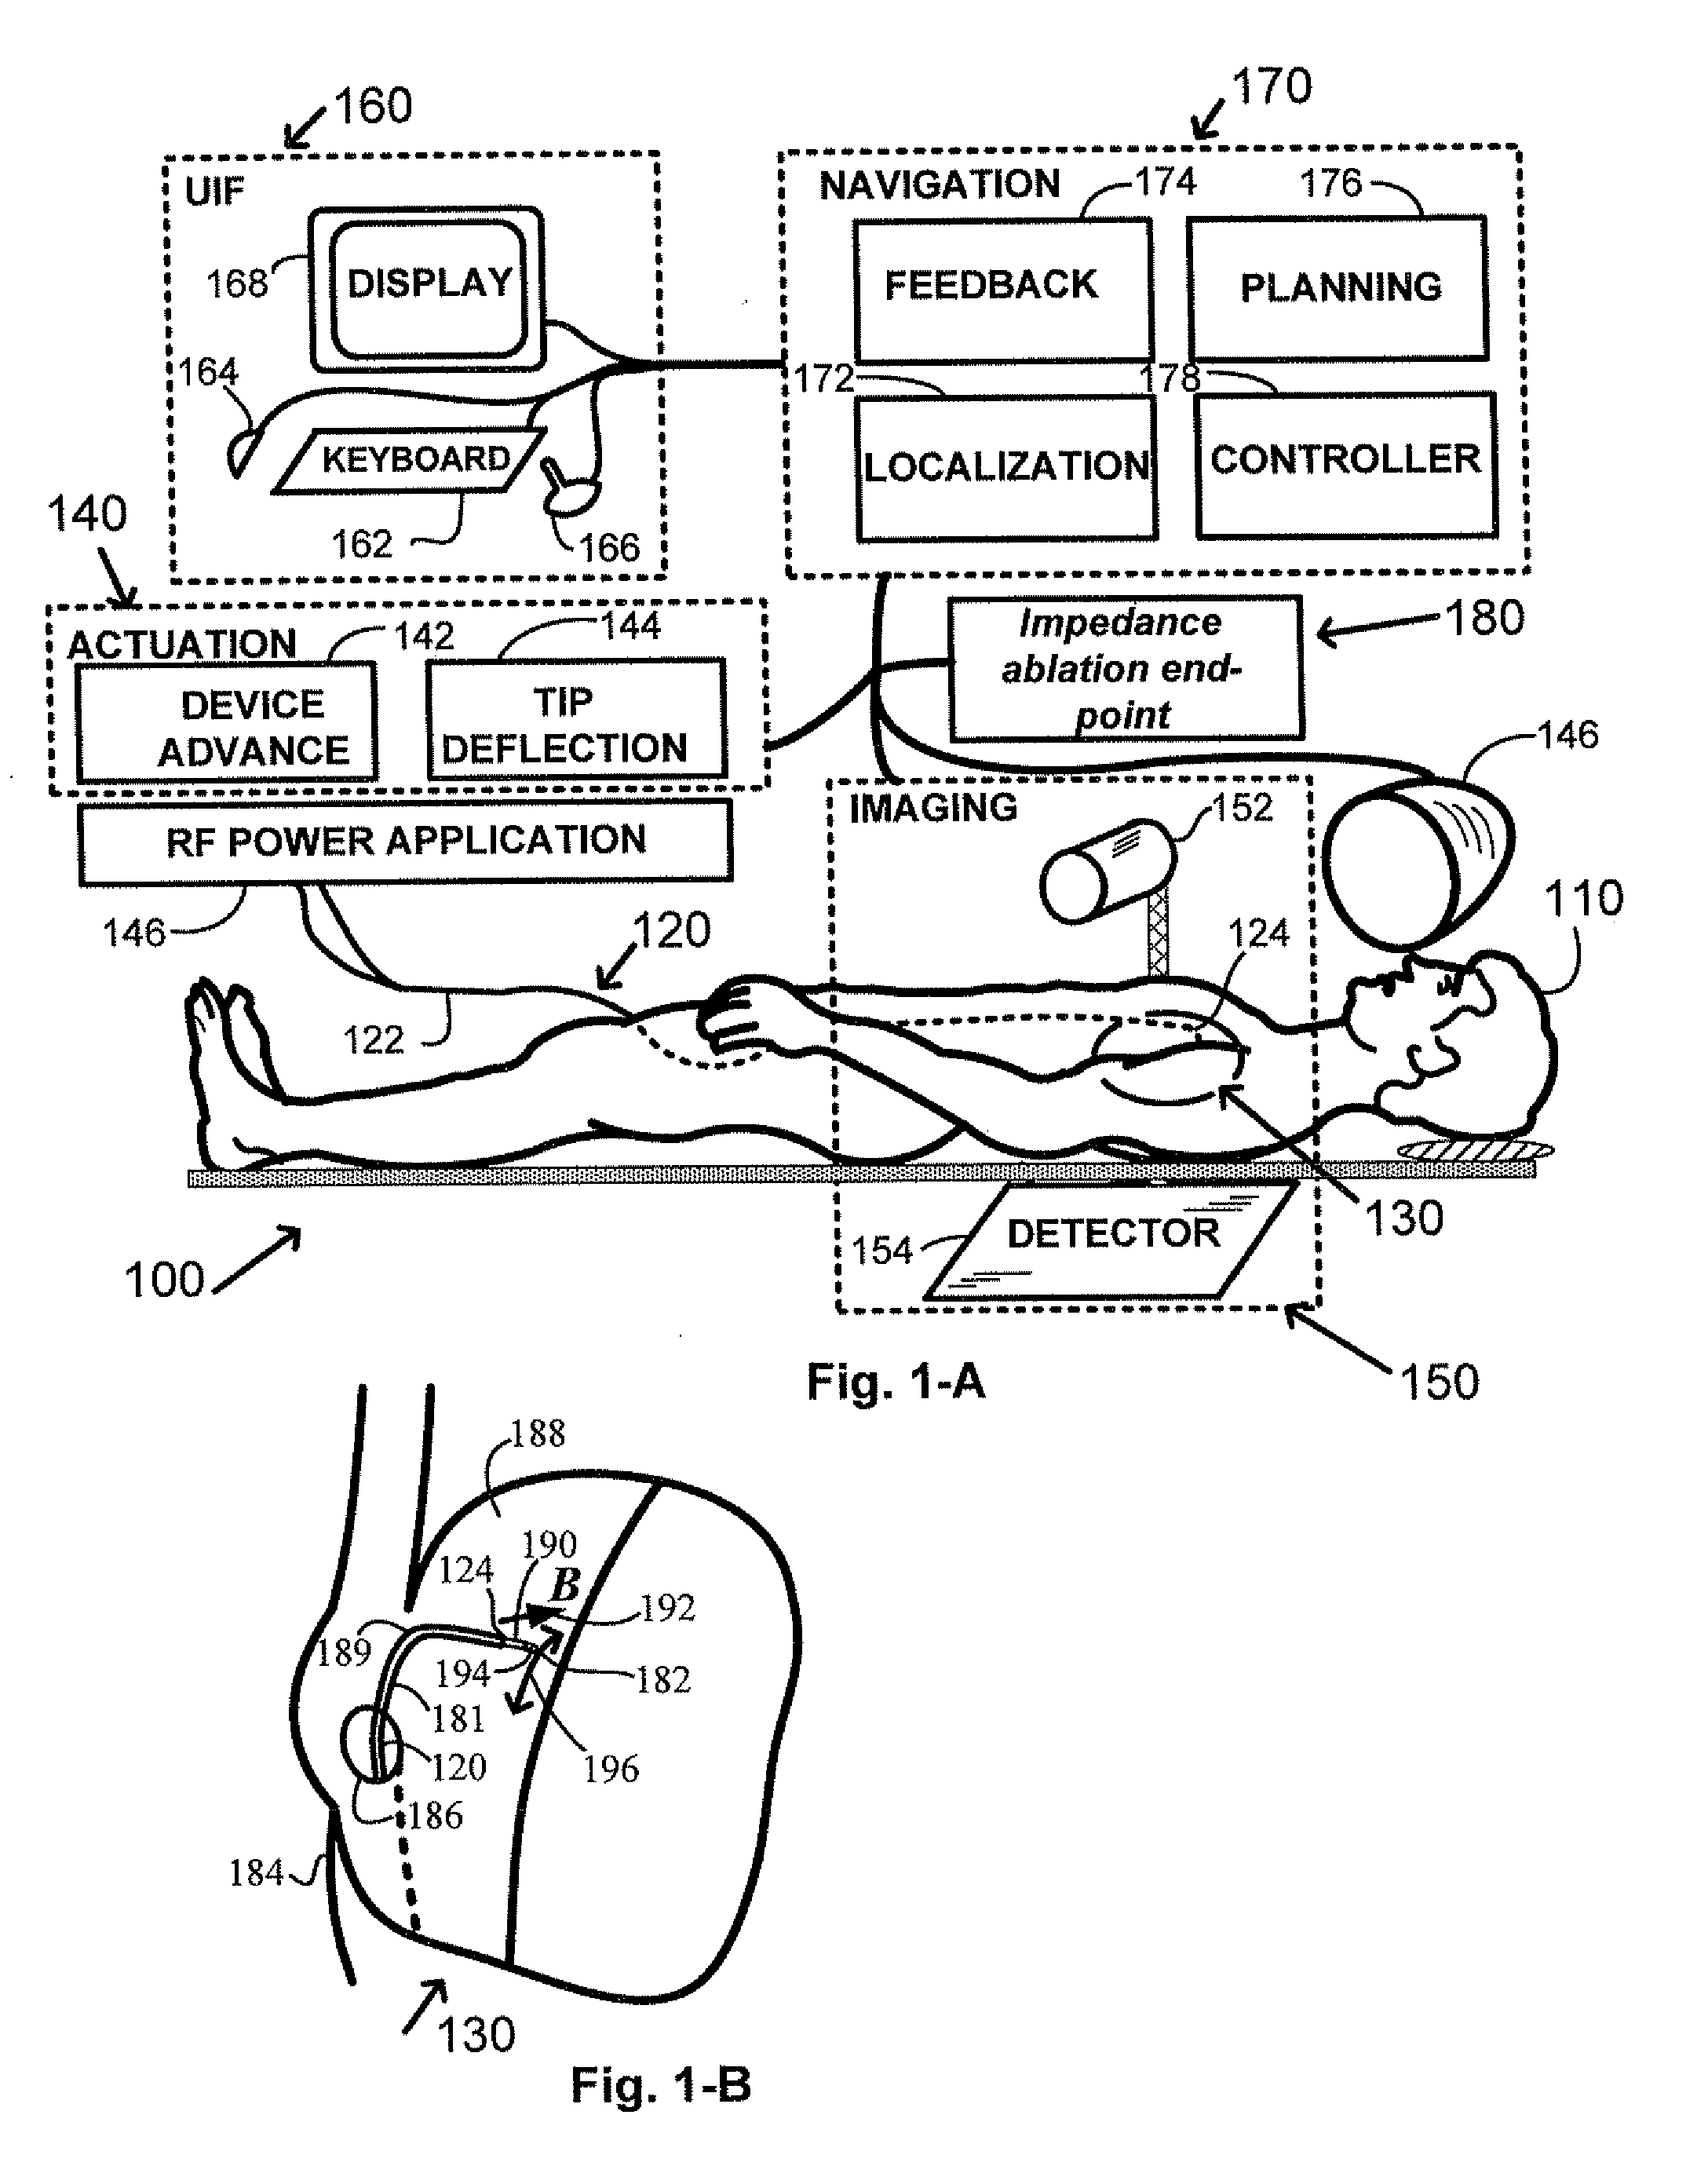 Method and apparatus for delivery and detection of transmural cardiac ablation lesions